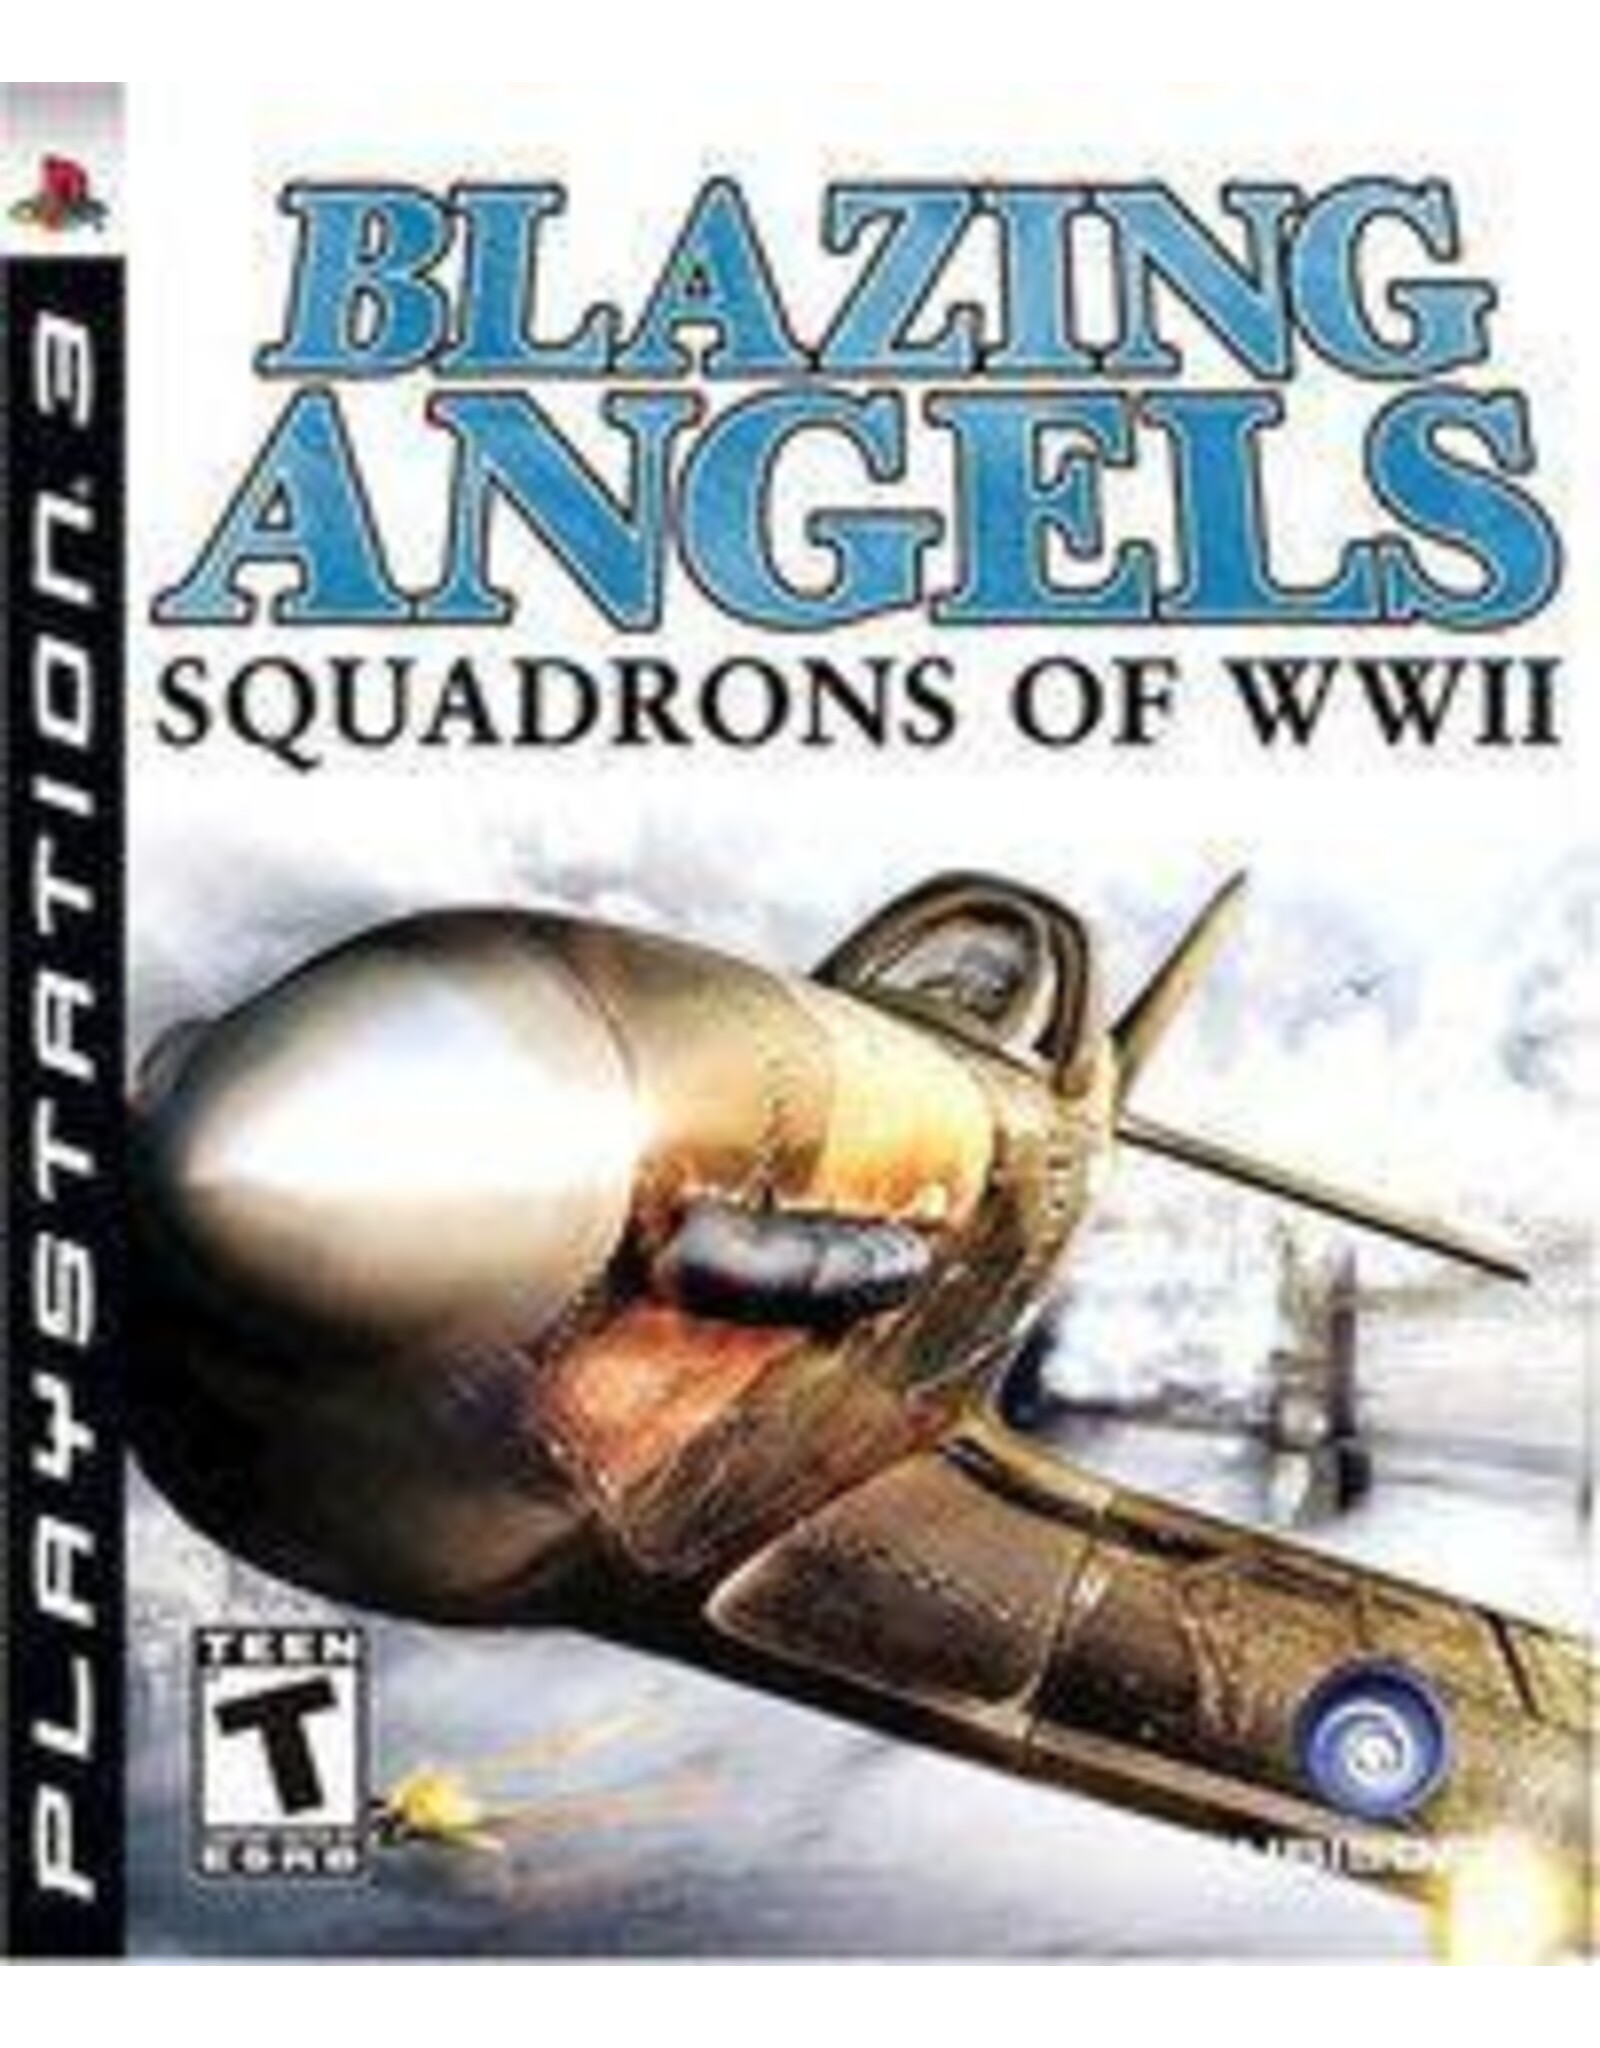 Playstation 3 Blazing Angels Squadrons of WWII (Used, No Manual)